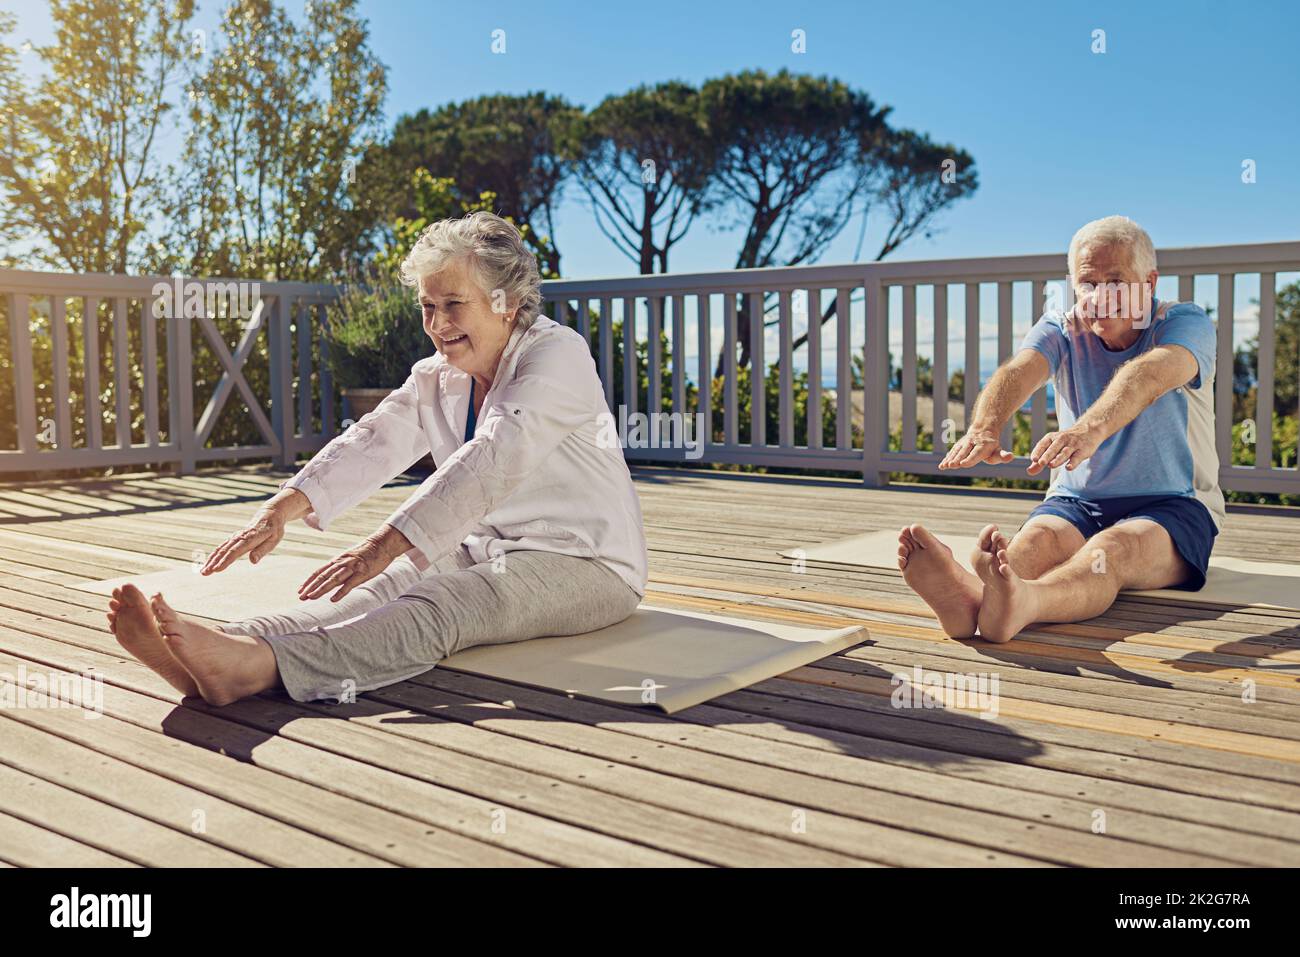 Keeping lithe and limber. Shot of a senior couple doing yoga together on their patio outside. Stock Photo